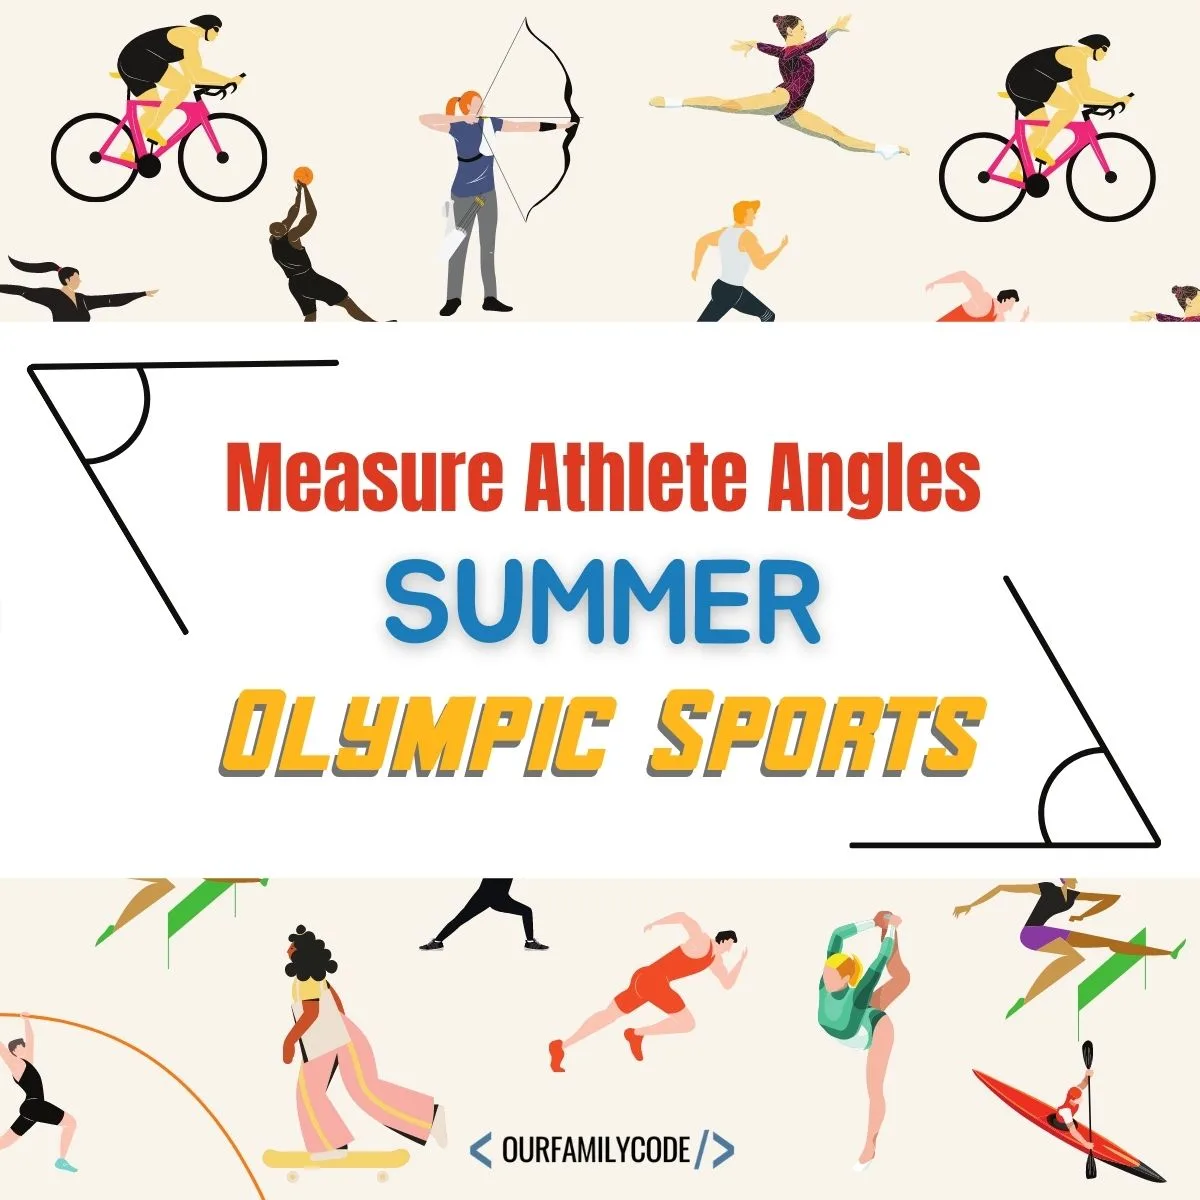 A picture of summer sport vectors on a tan background with text that reads "measure athlete angles summer olympic sports".